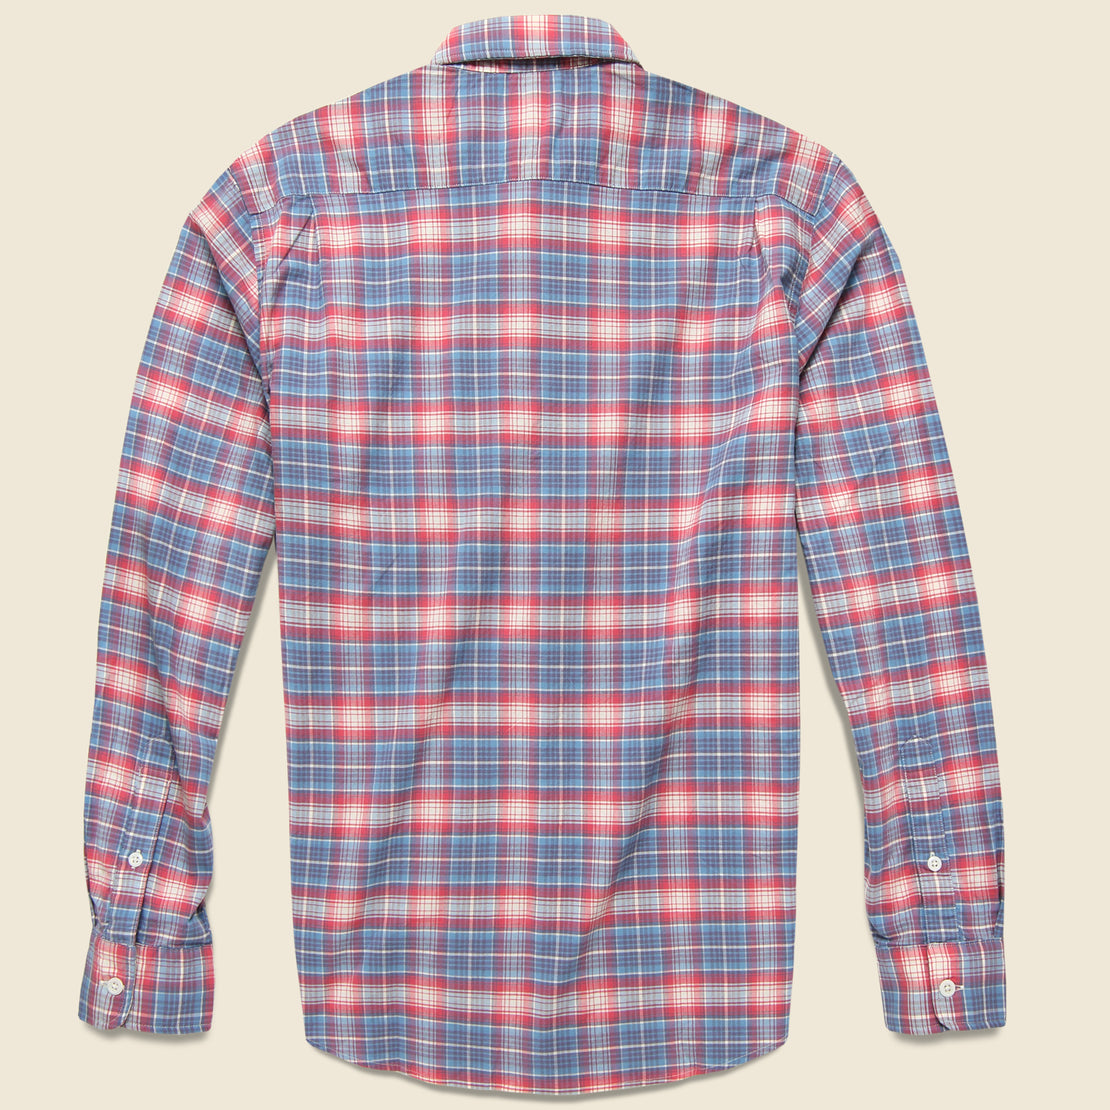 Ventura Shirt - Red/White/Blue - Faherty - STAG Provisions - Tops - L/S Woven - Plaid